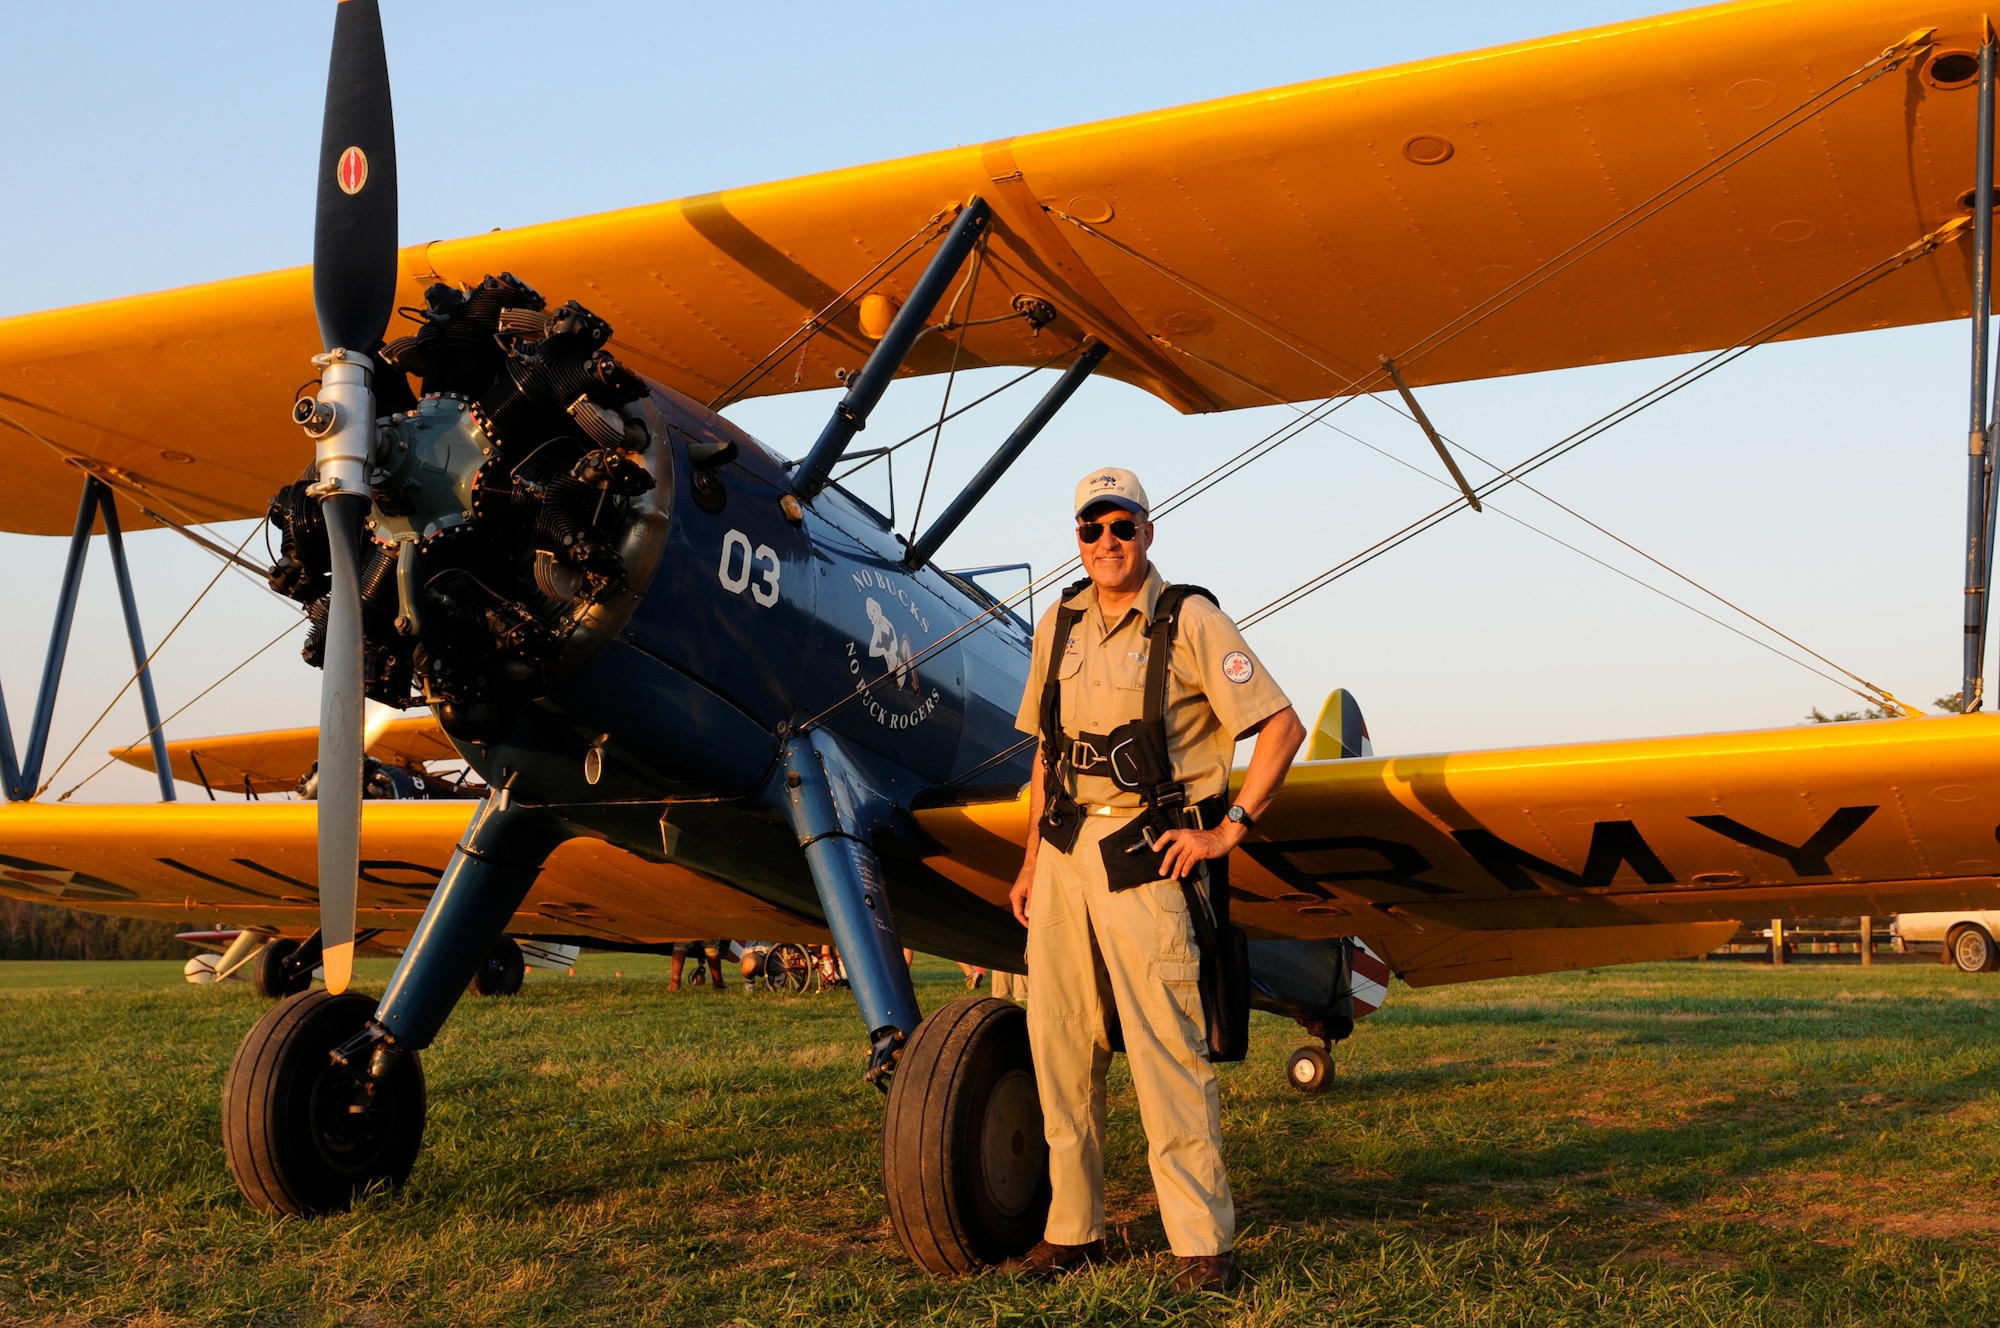 BEALETON, Va. -- Tech. Sgt. Dave Brown, 459th Aeromedical Evacuation Squadron medical material specialist, stands in front of his 1941 PT-17 Stearman after providing open cockpit rides here Oct. 10. When he's not performing his duties as an Air Force Reservist, Sergeant Brown performs aerobatic maneuvers for the Flying Circus air show and provides flight instruction through his business, Brown Aviation. (U.S. Air Force photo/Tech. Sgt. Steve Lewis)